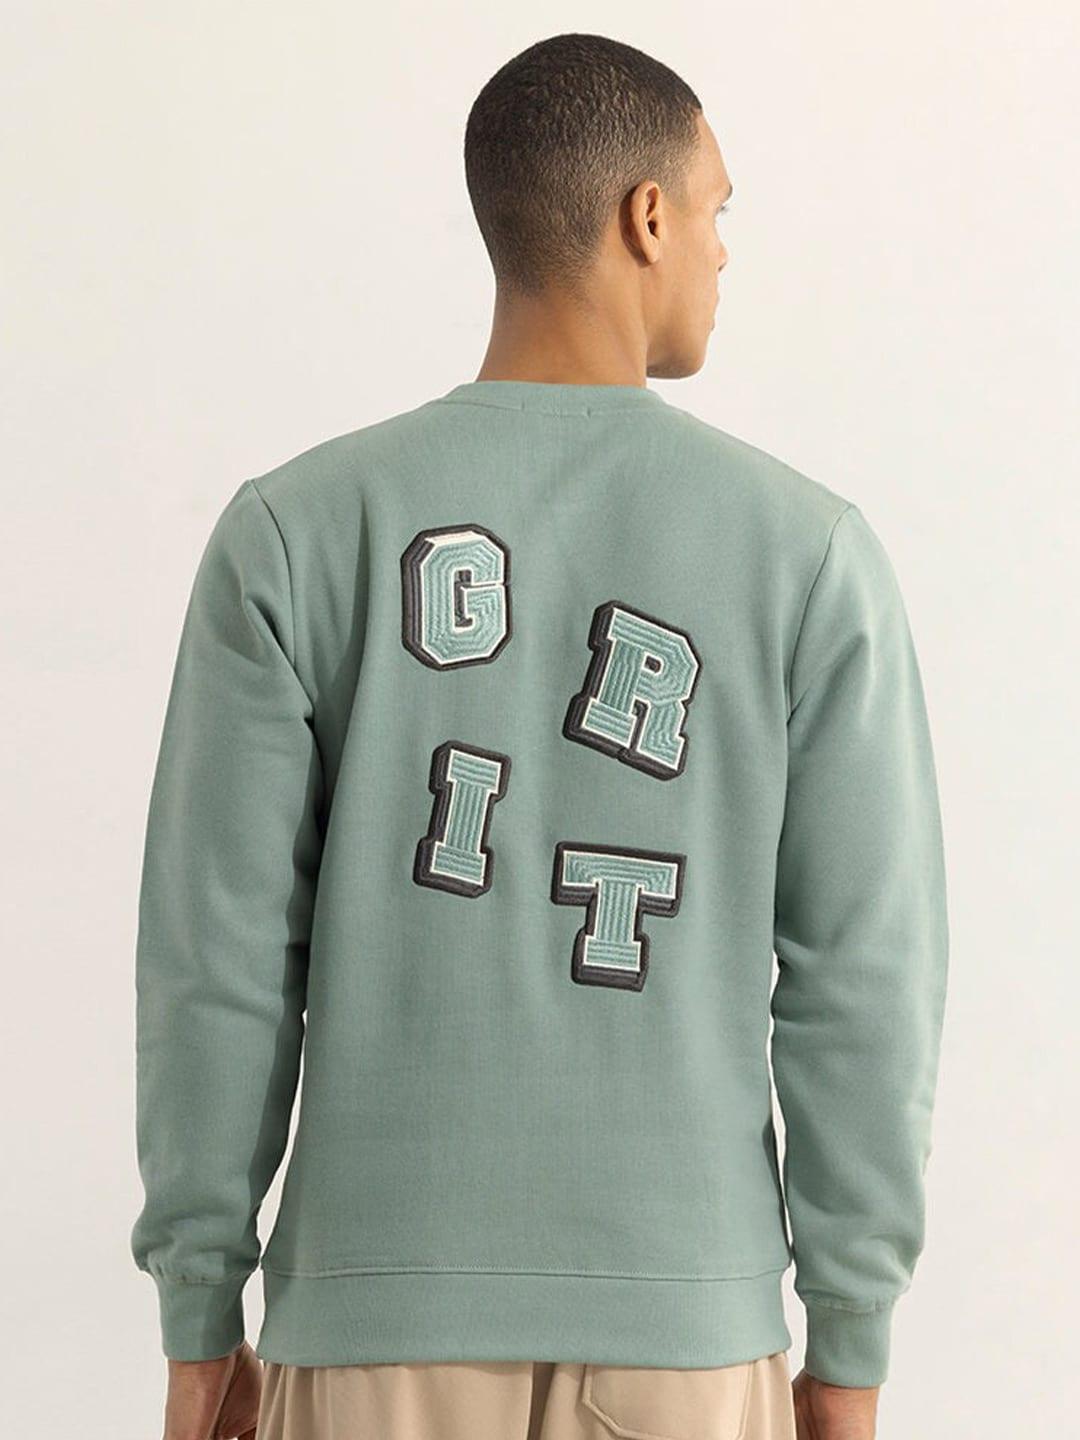 snitch typography printed pullover